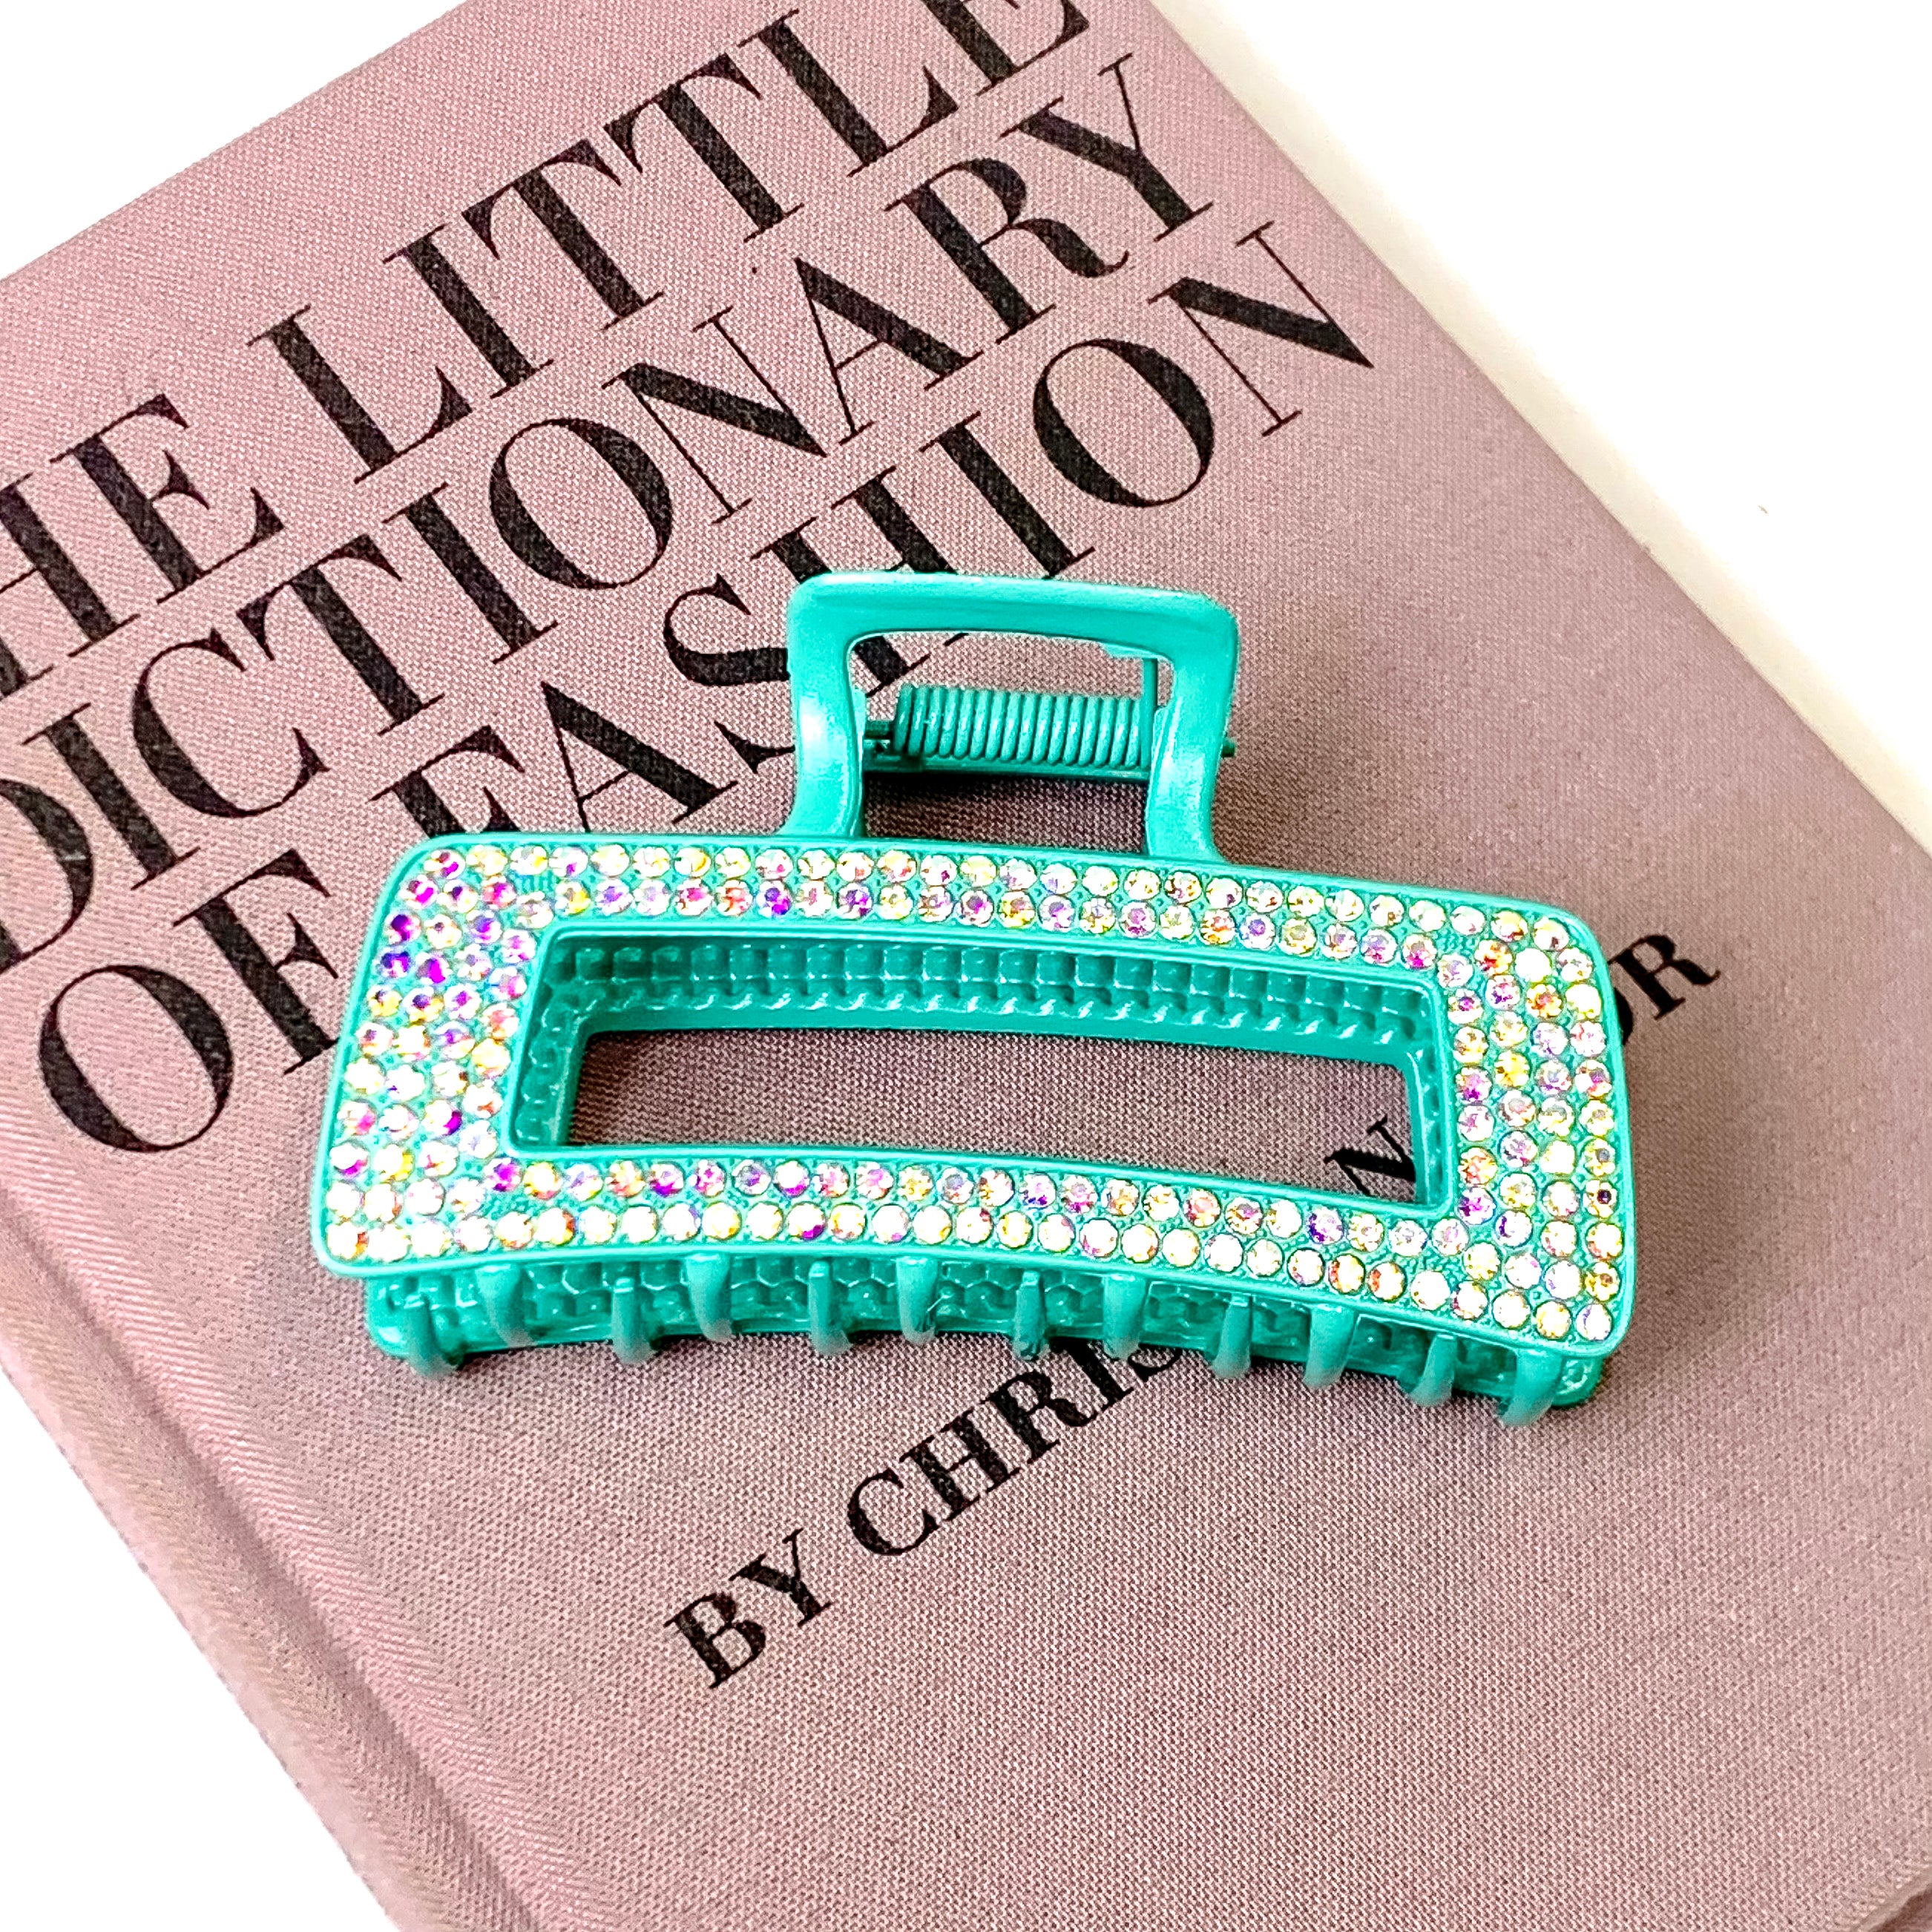 AB Crystal Embellished Metal Rectangle Hair Clip in Turquoise Blue - Giddy Up Glamour Boutique